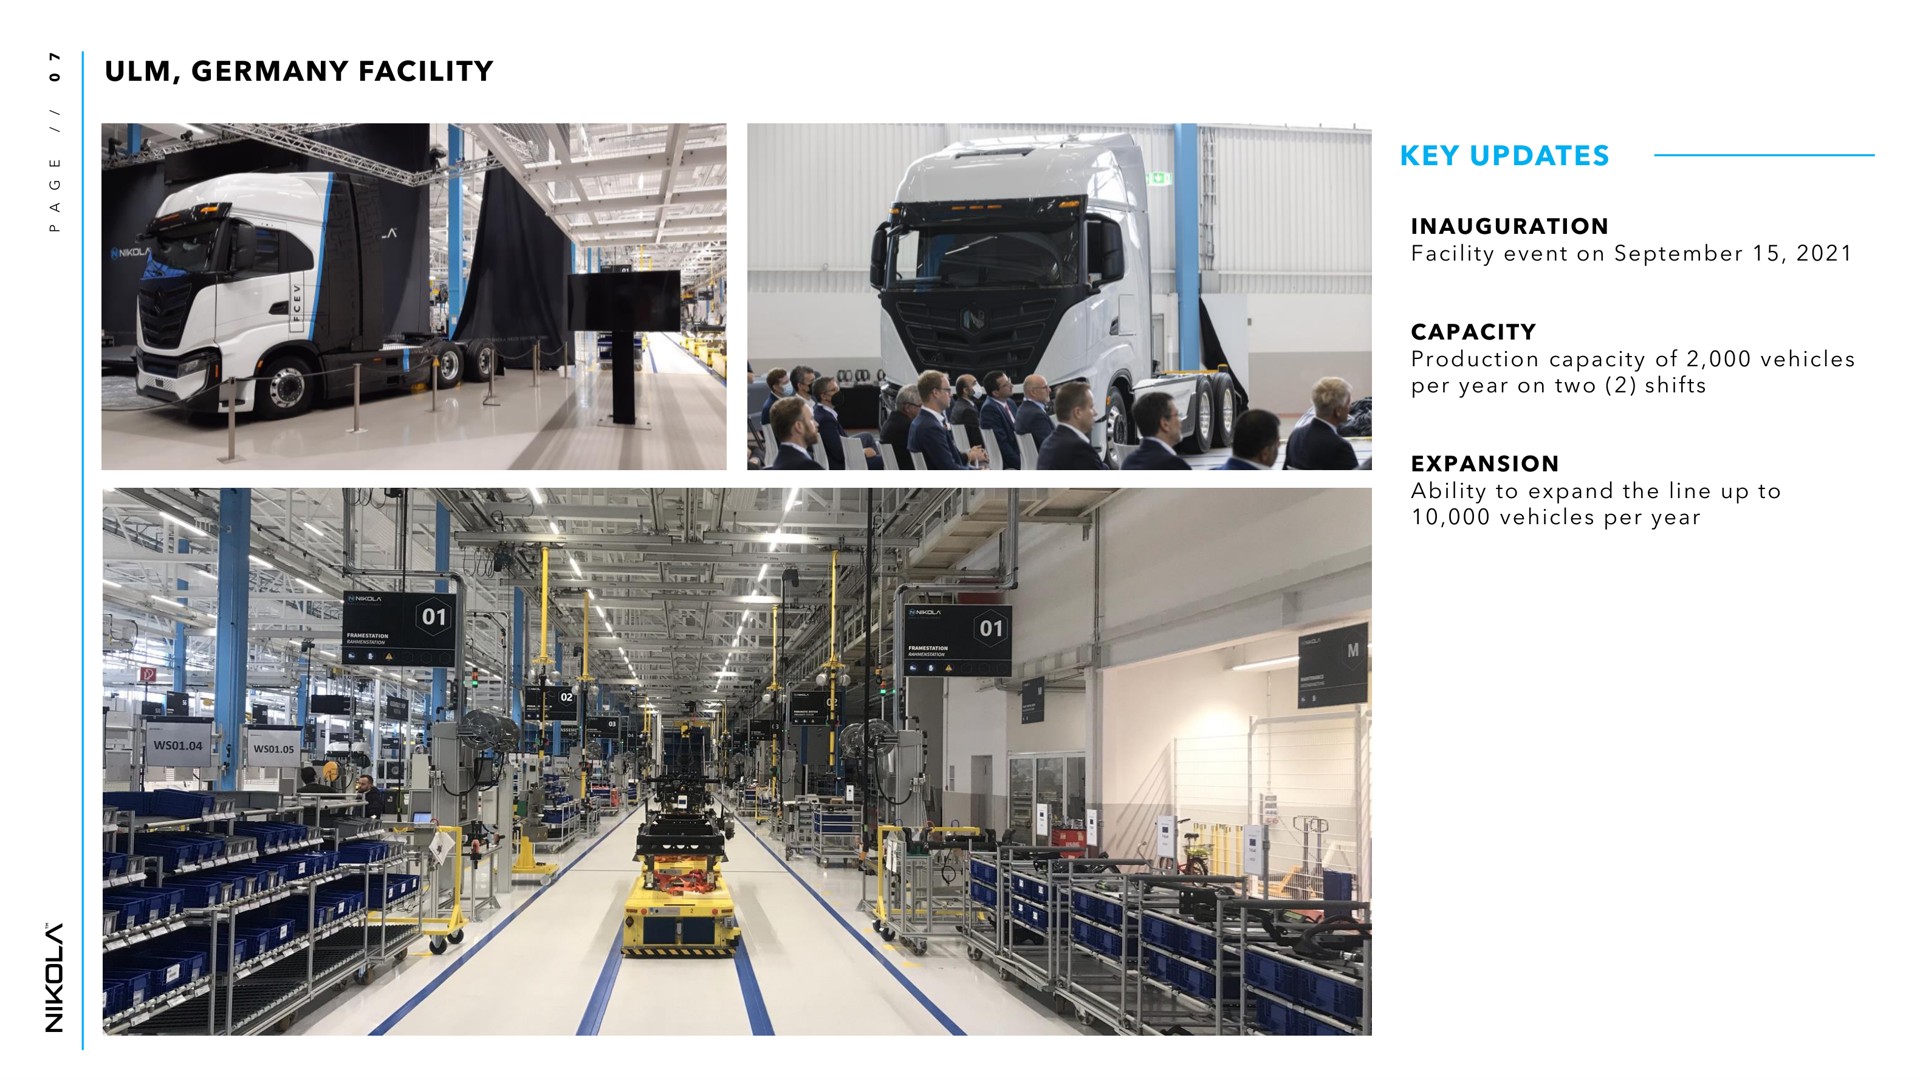 facility key updates inauguration facility event on capacity production capacity of vehicles per year on two shifts expansion ability to expand the line up to vehicles per year | Nikola